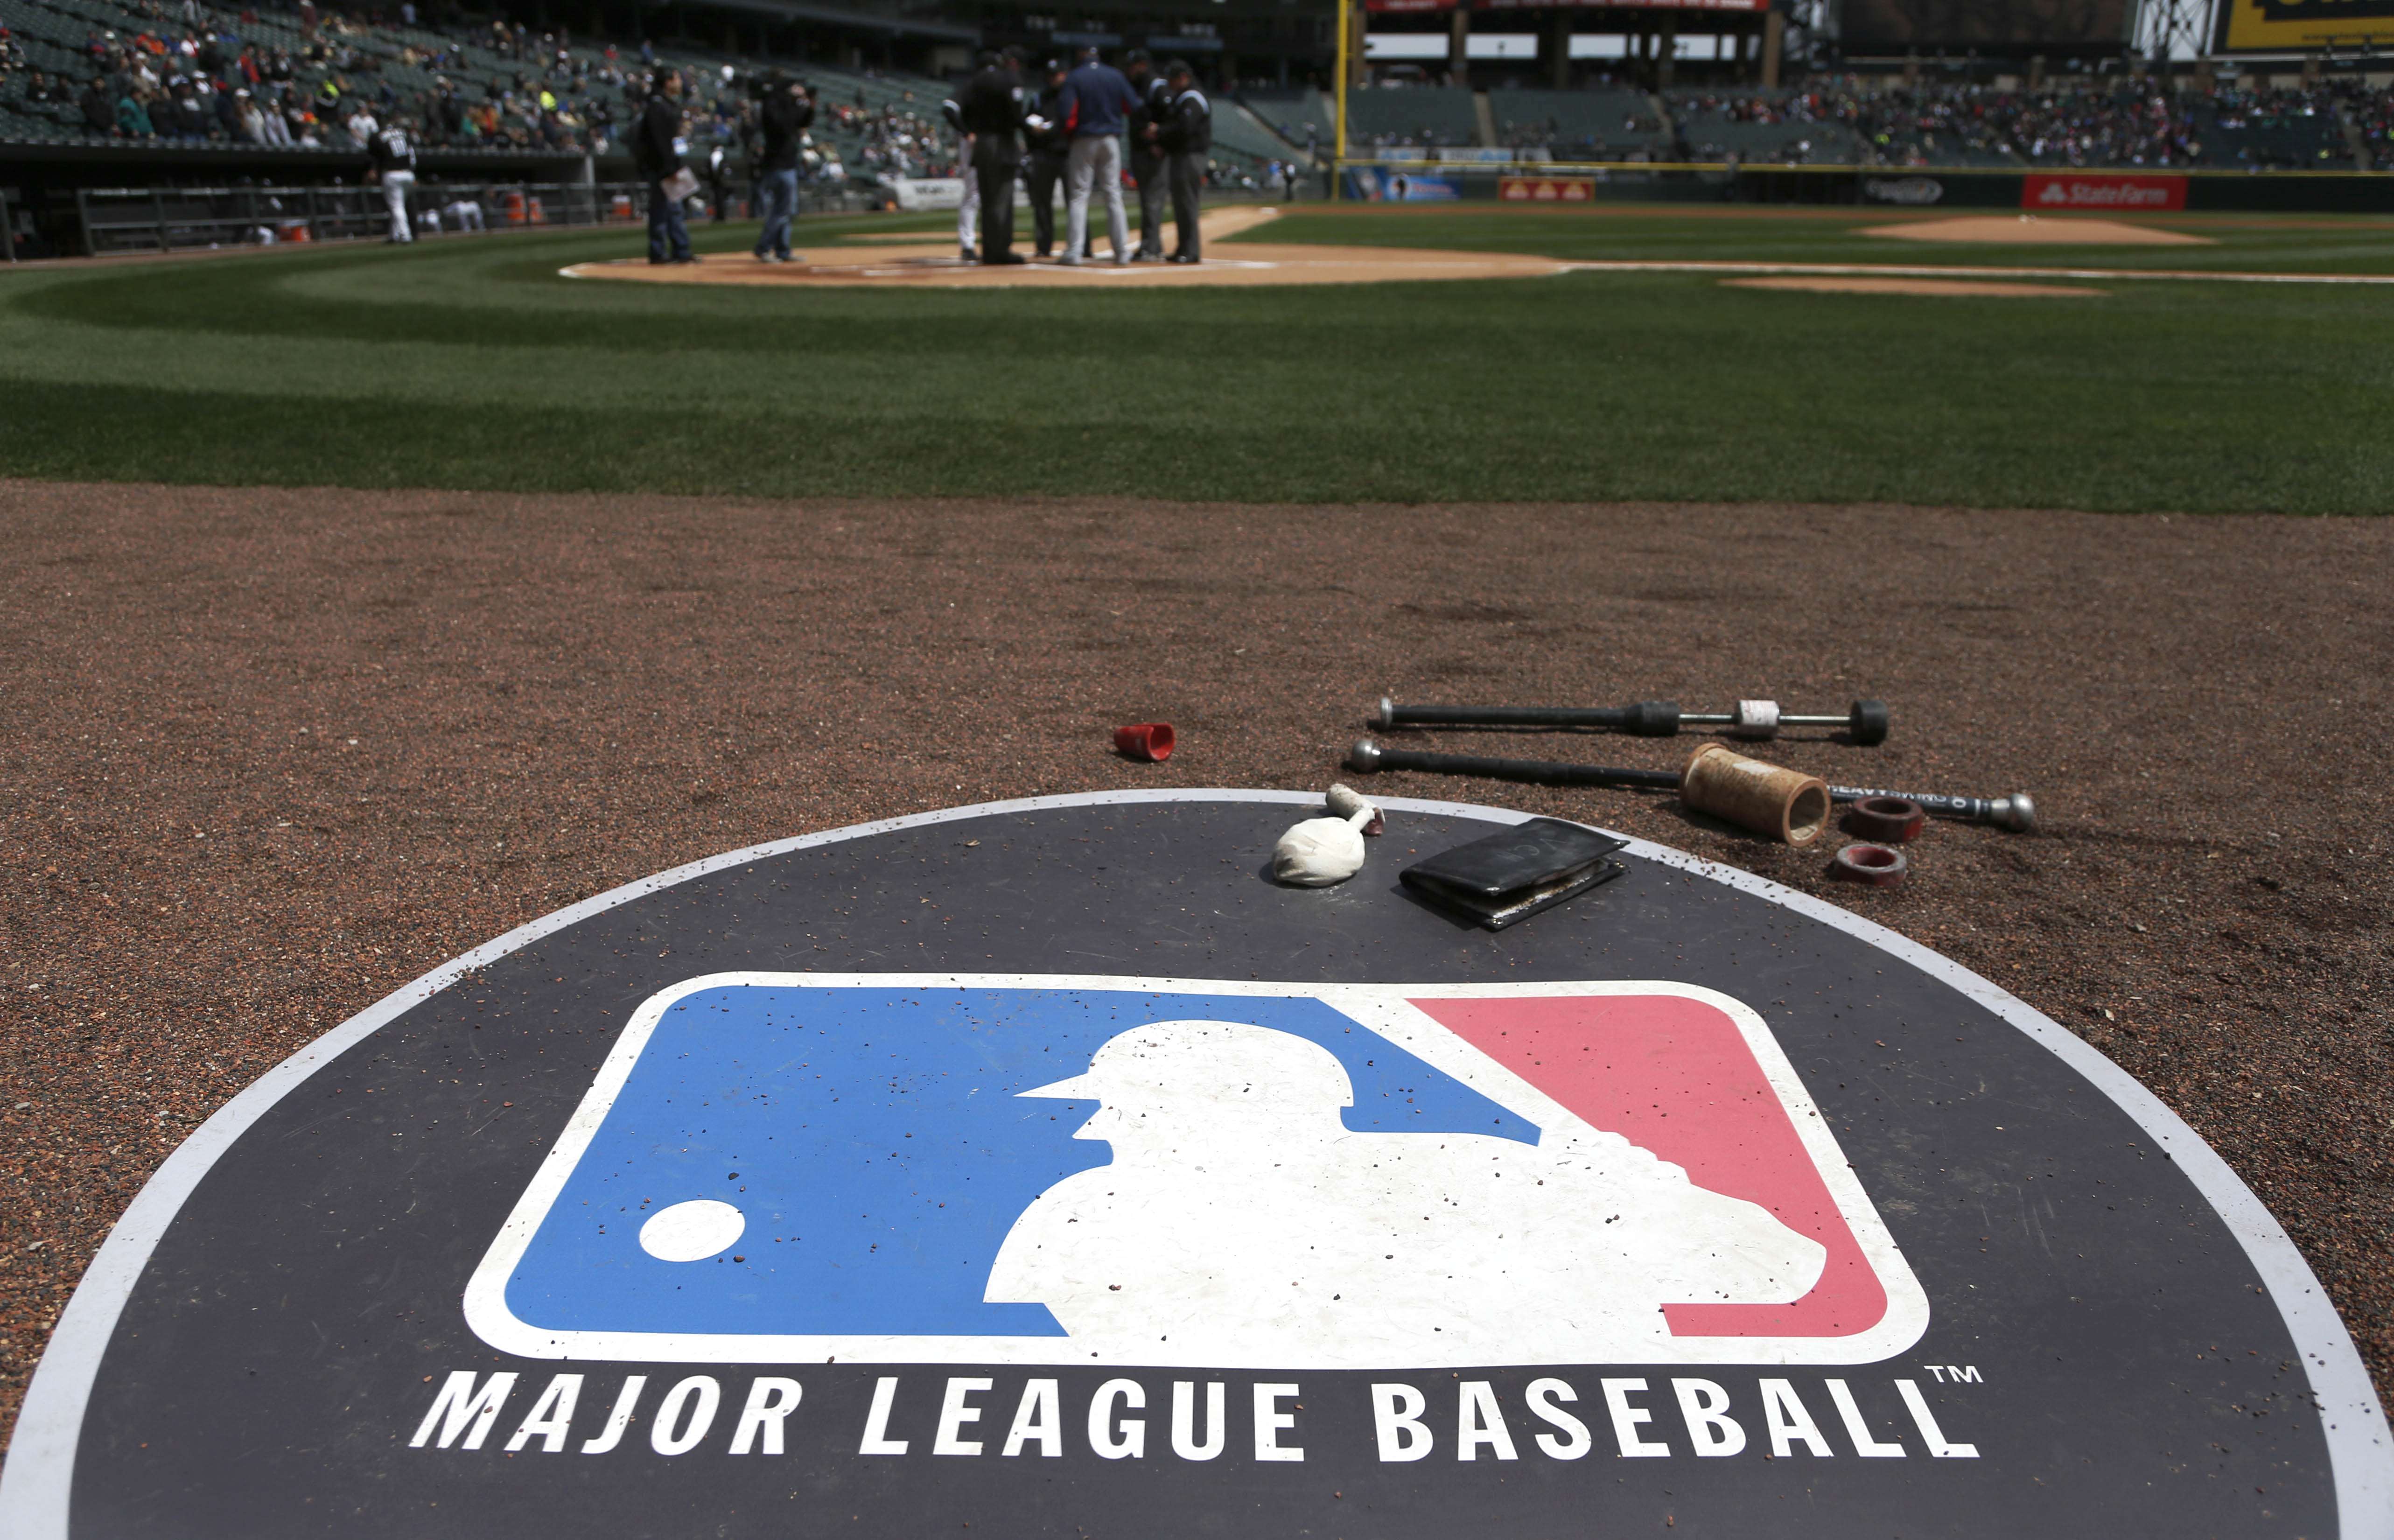 Mlb Opening Day Schedule 2022 Mlb Announces Complete 2022 Schedule; Opening Day Set For March 31 |  Bleacher Report | Latest News, Videos And Highlights